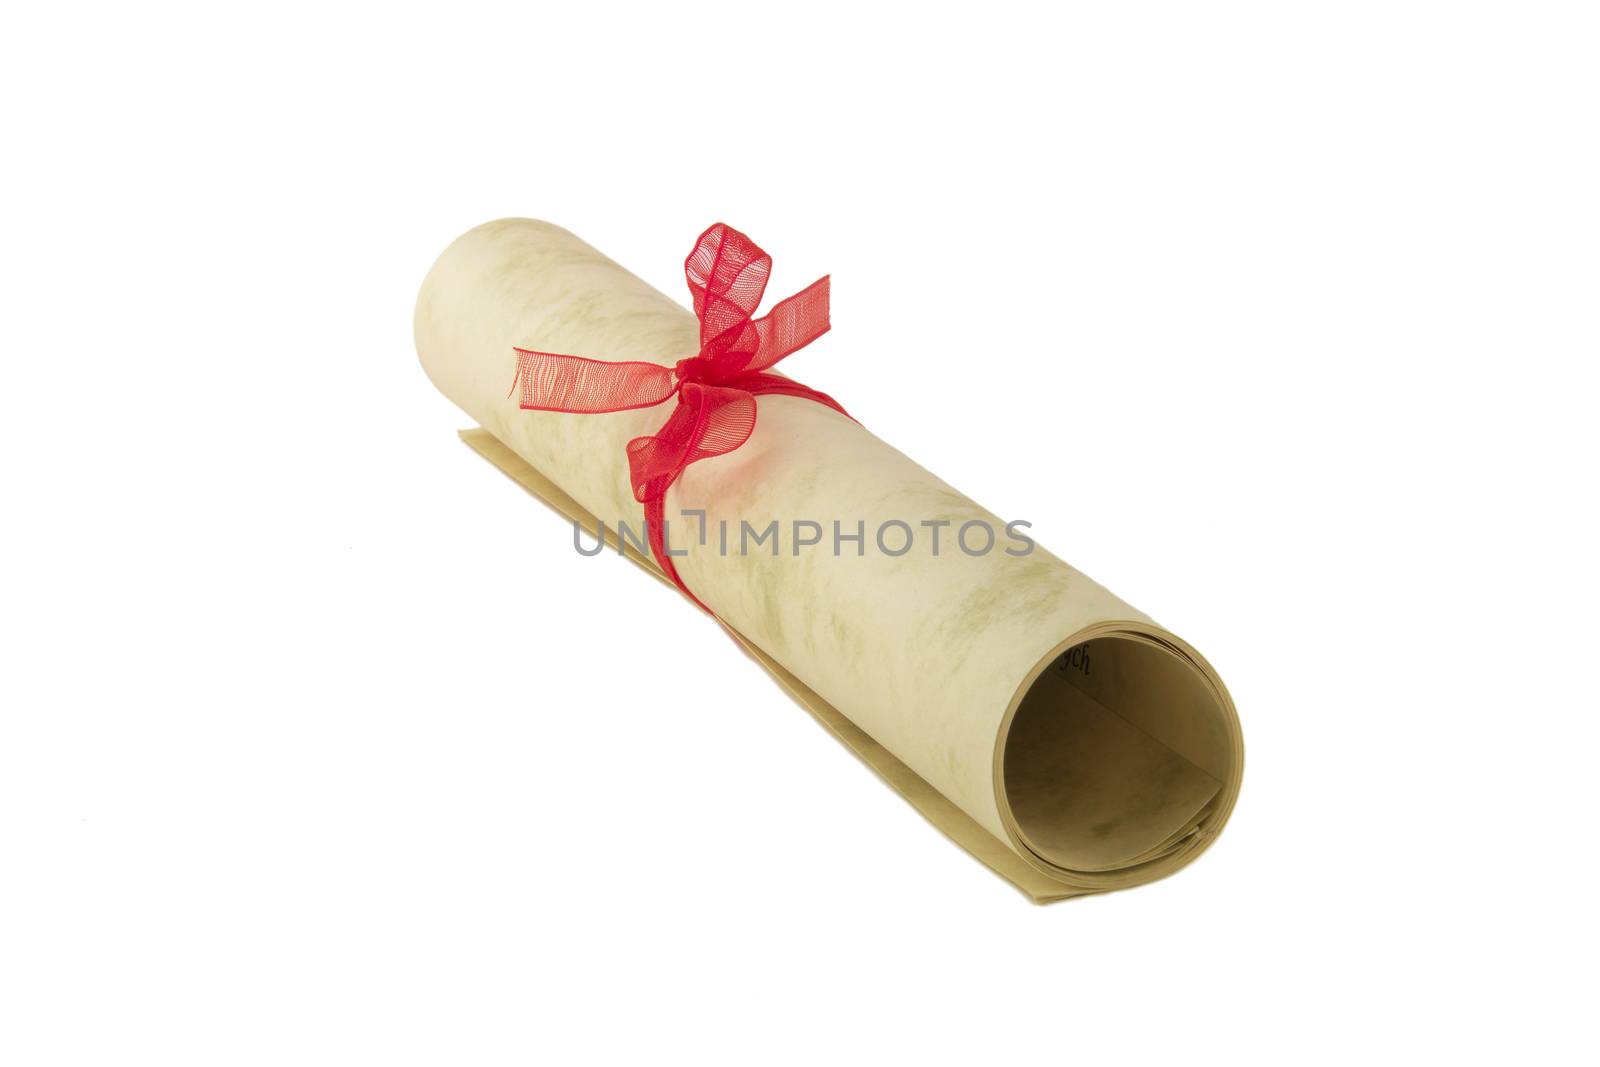 Paper scroll isolated on white with bow. Certificate diploma or award document. Graduation, success achievement parchment with ribbon. vintage wrapped tube close-up photography. old fashioned papyrus.